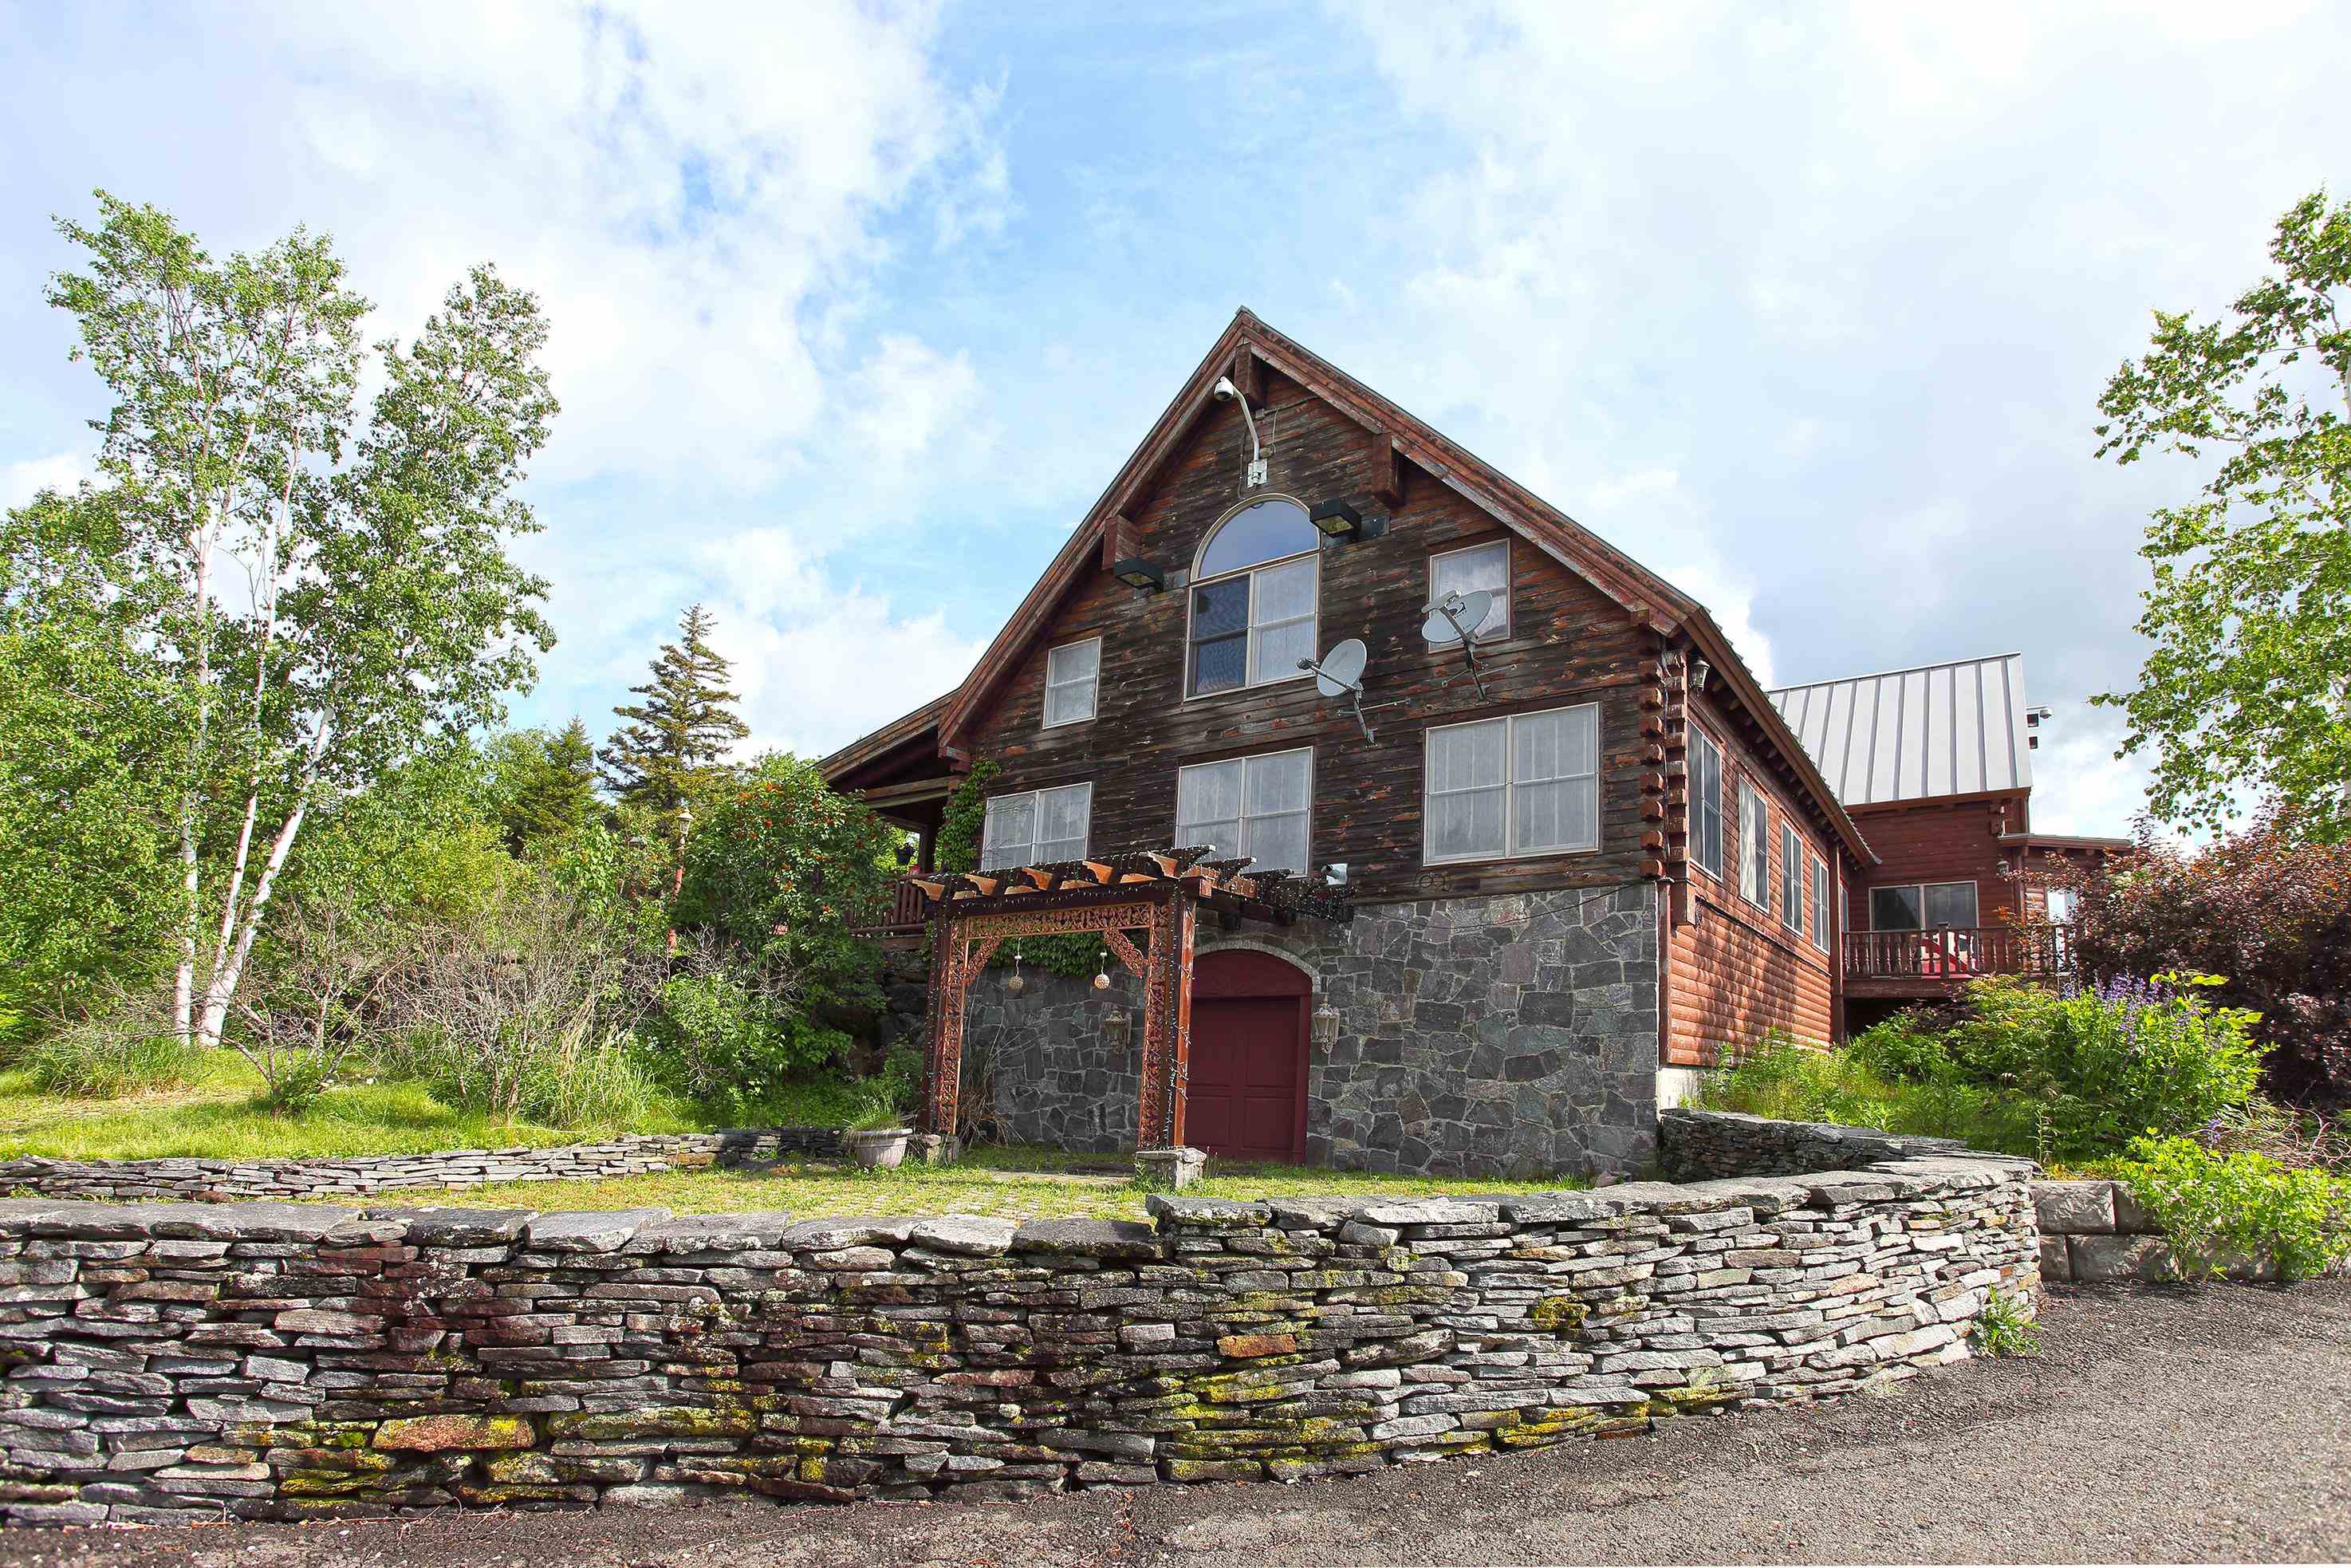 Here is your chance to own a stunning log home...